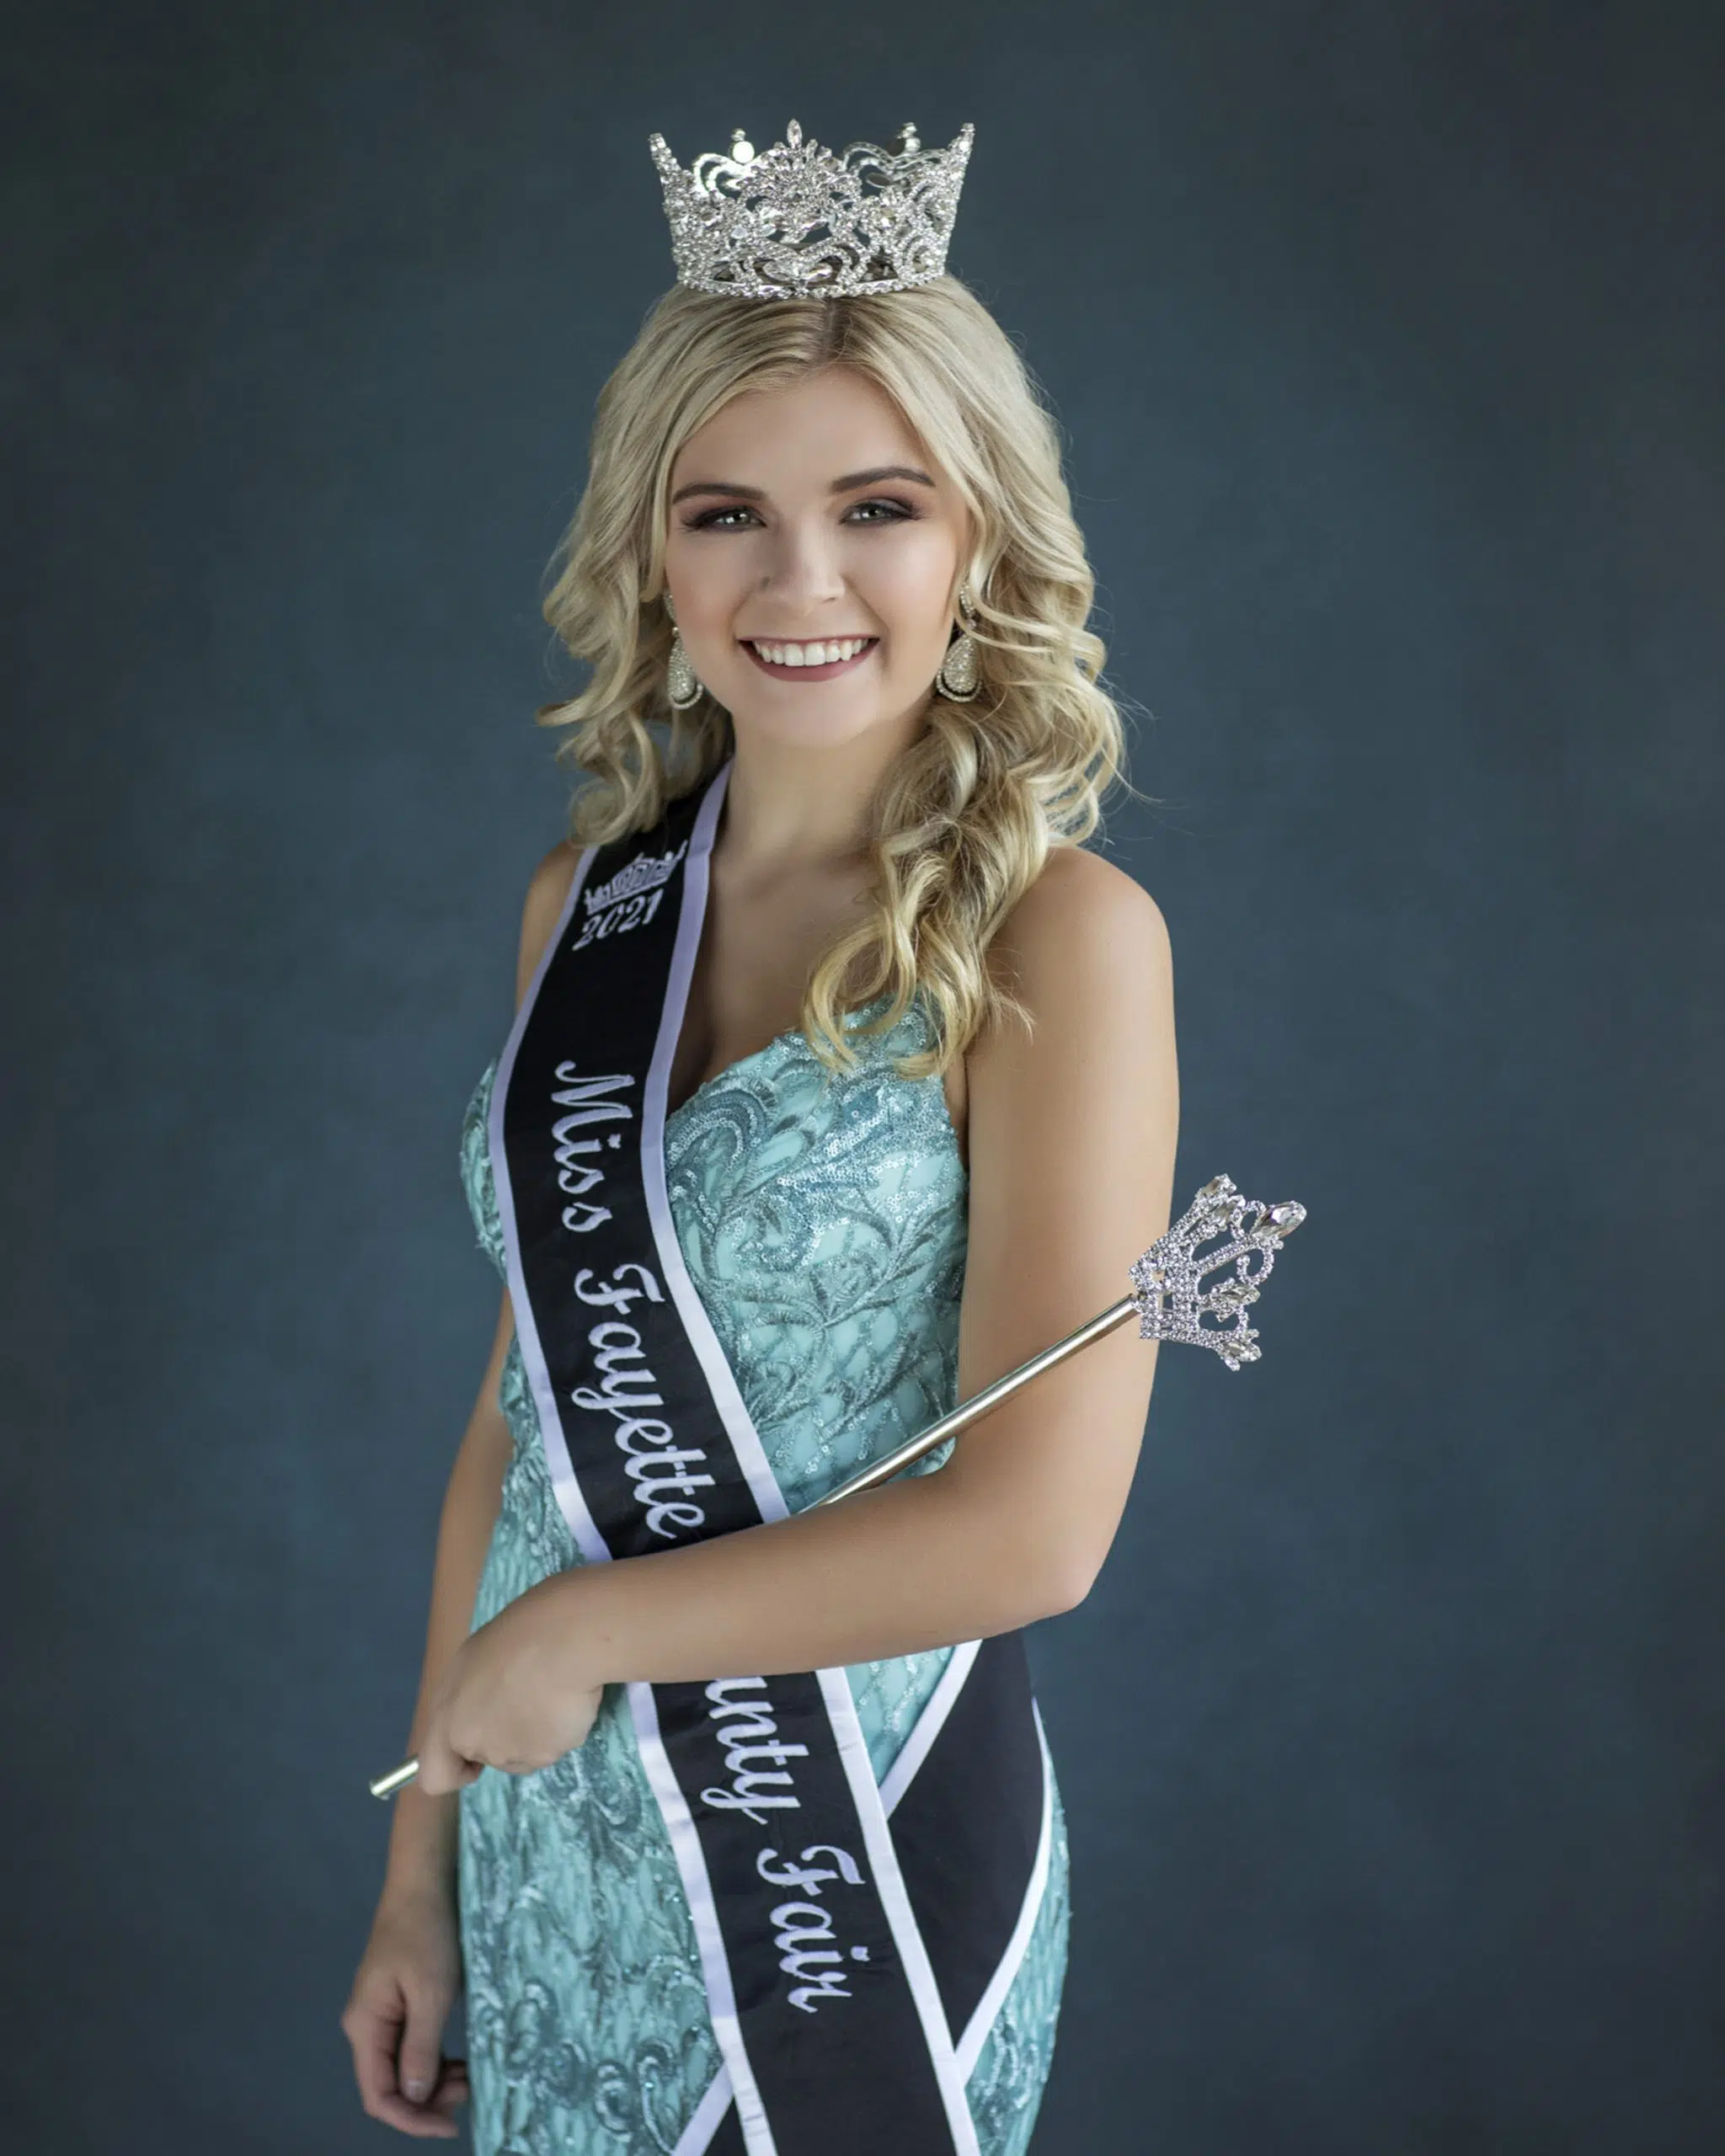 Worker competing at Miss Illinois County Fair Queen Pageant Vandalia